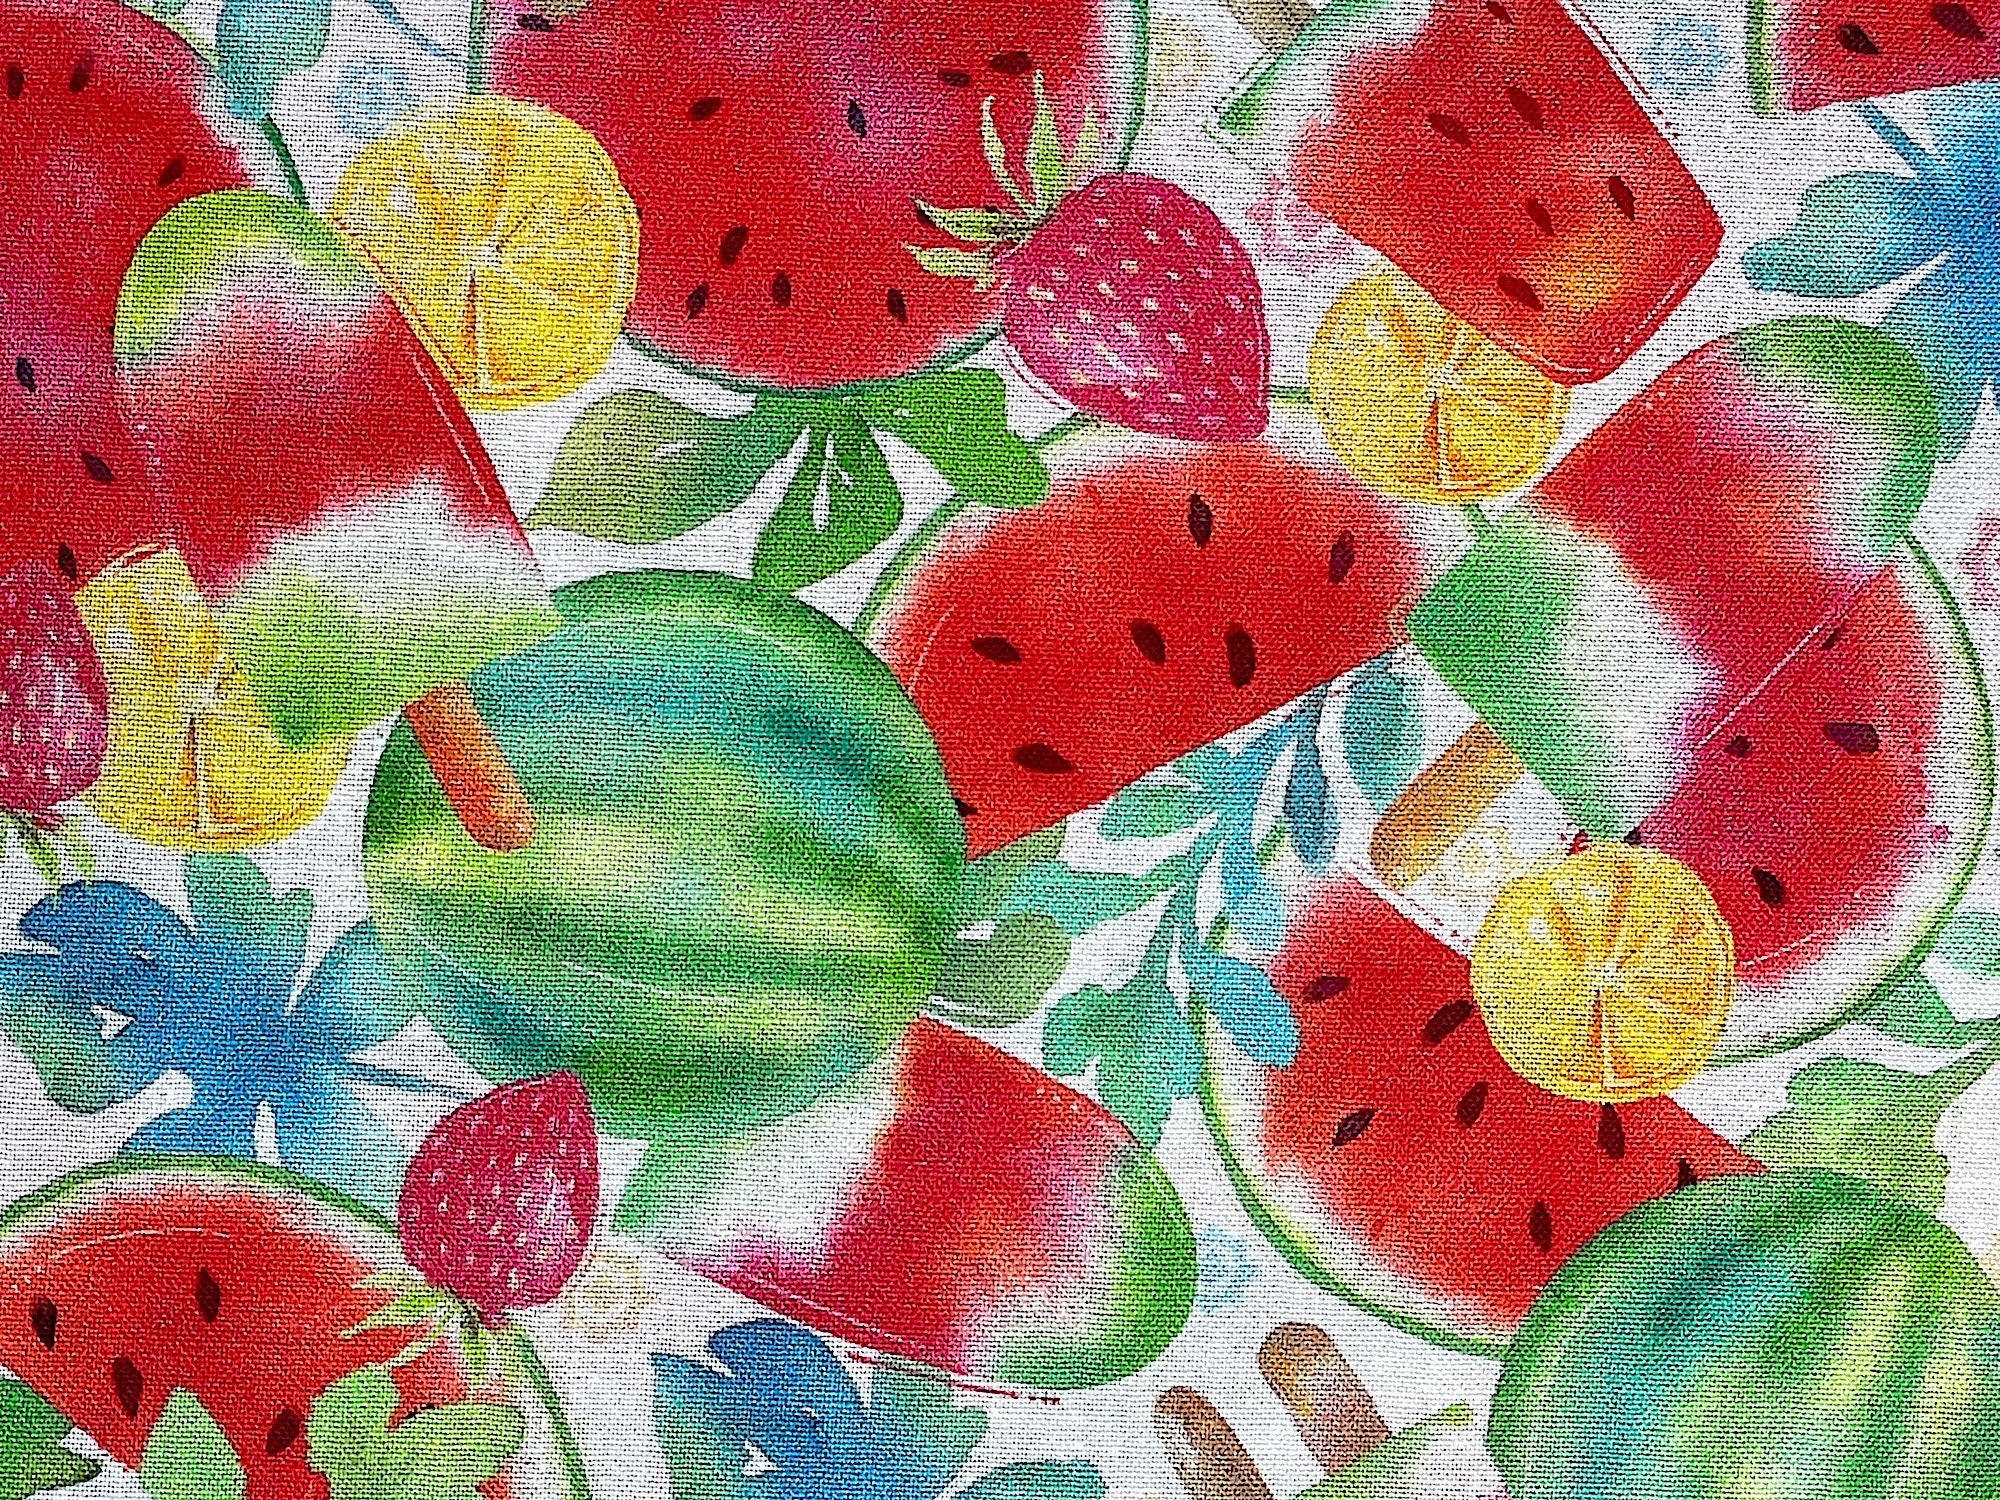 Close up of watermelon, strawberries, lemons and popsicles.